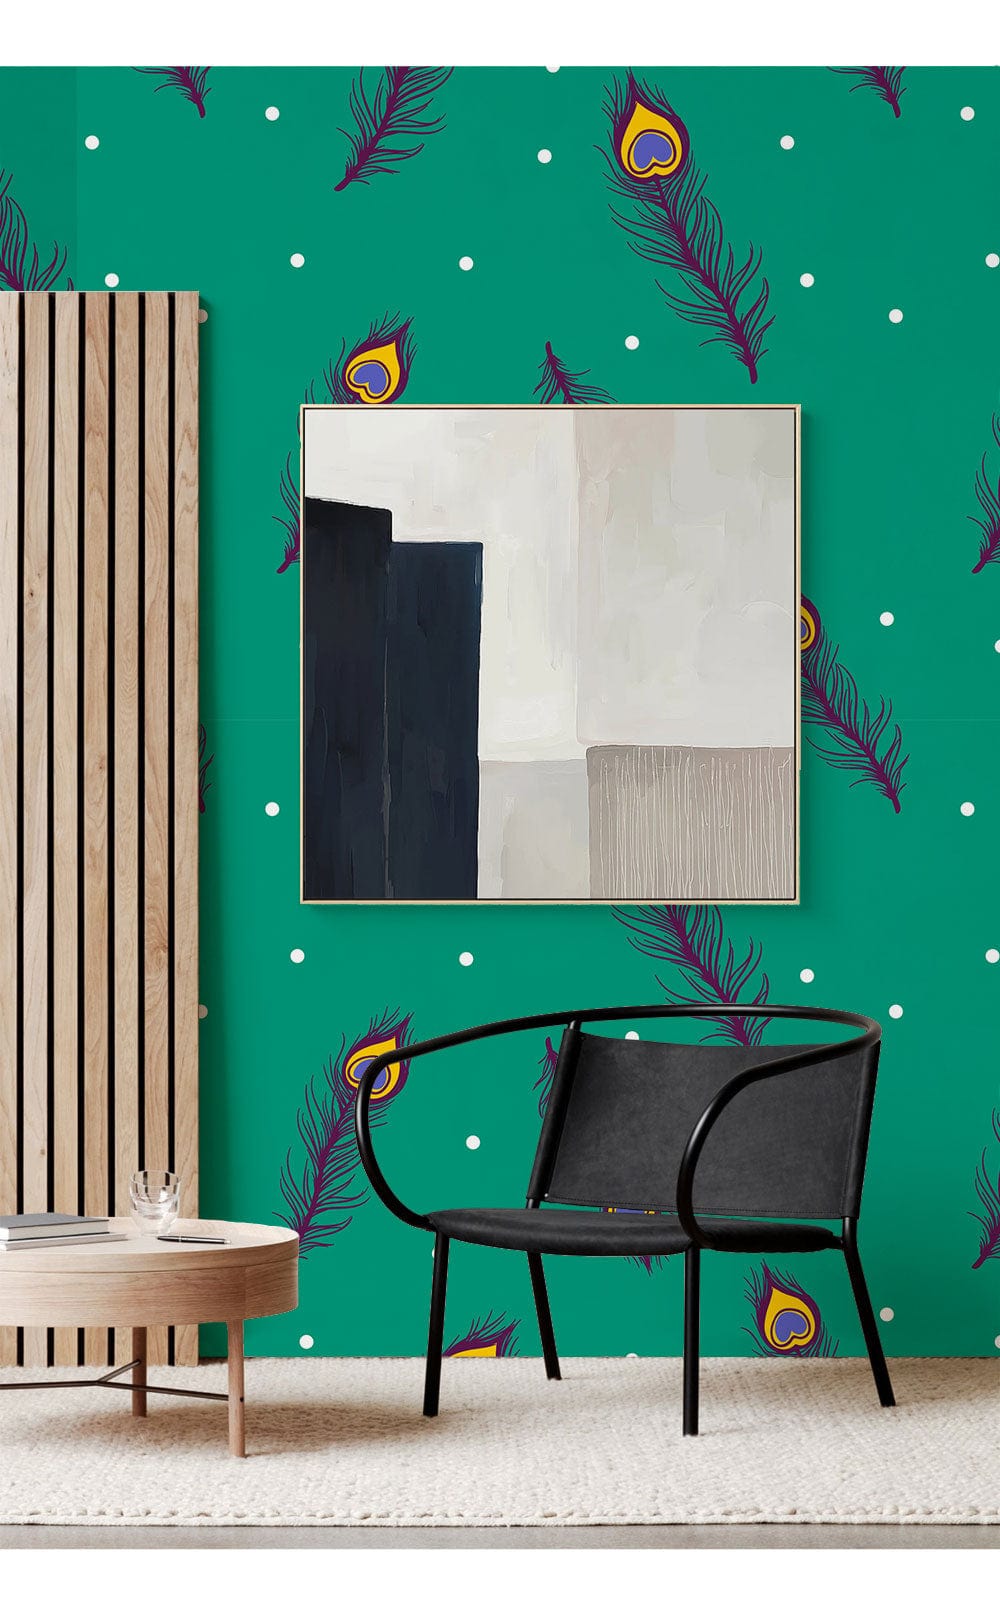 Wallpaper mural for the hallway with a feather design on a vibrant green background.